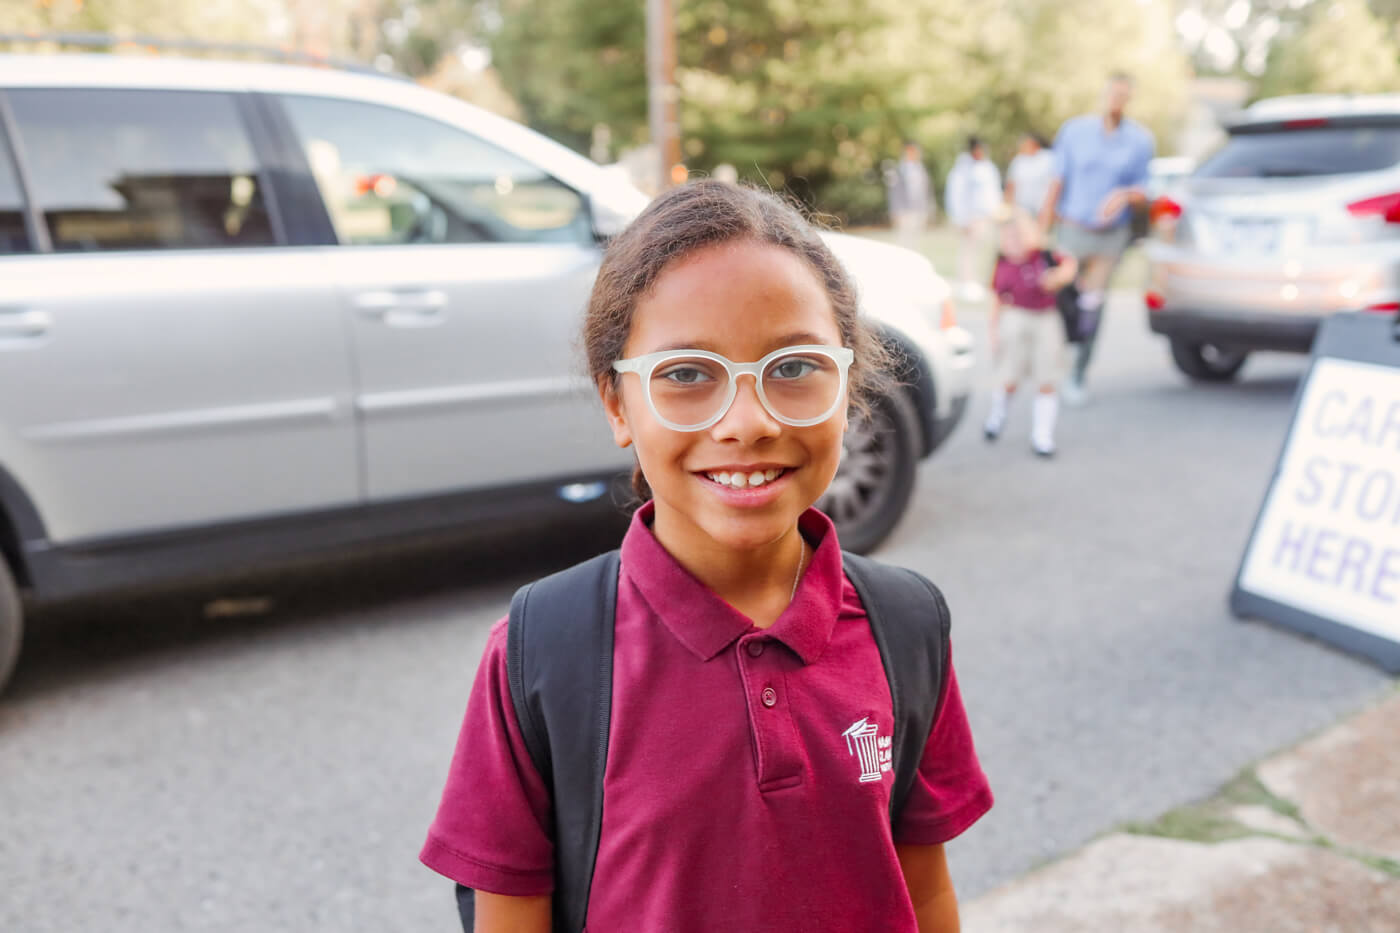 Student looks at camera and smiles in parking lot as students arrive to school